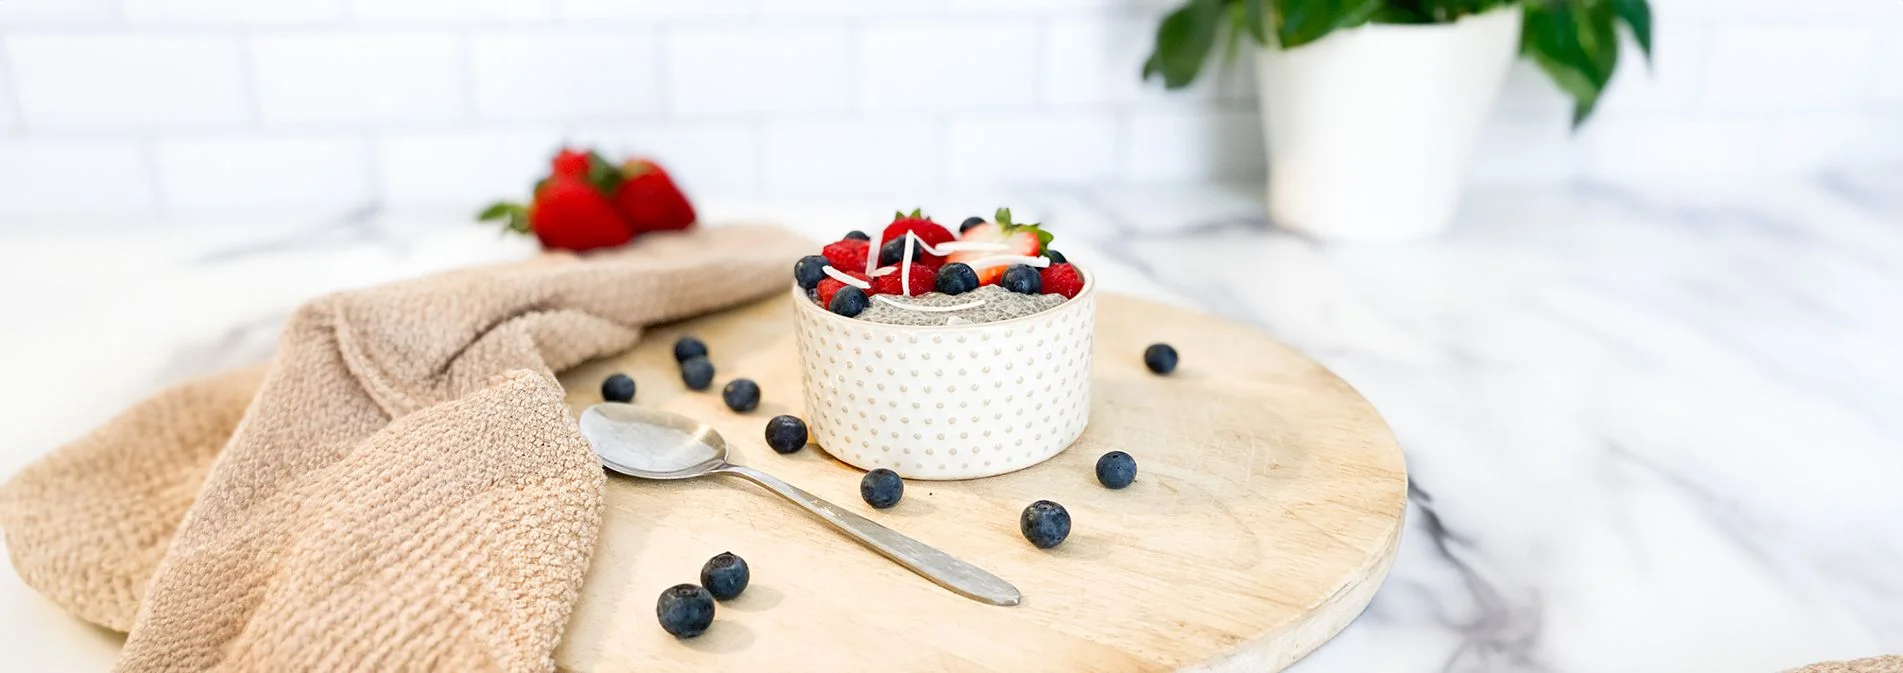 Ceramic bowl of vanilla chia pudding with fresh berries sprinkled on top. Silver spoon laying next to bowl.